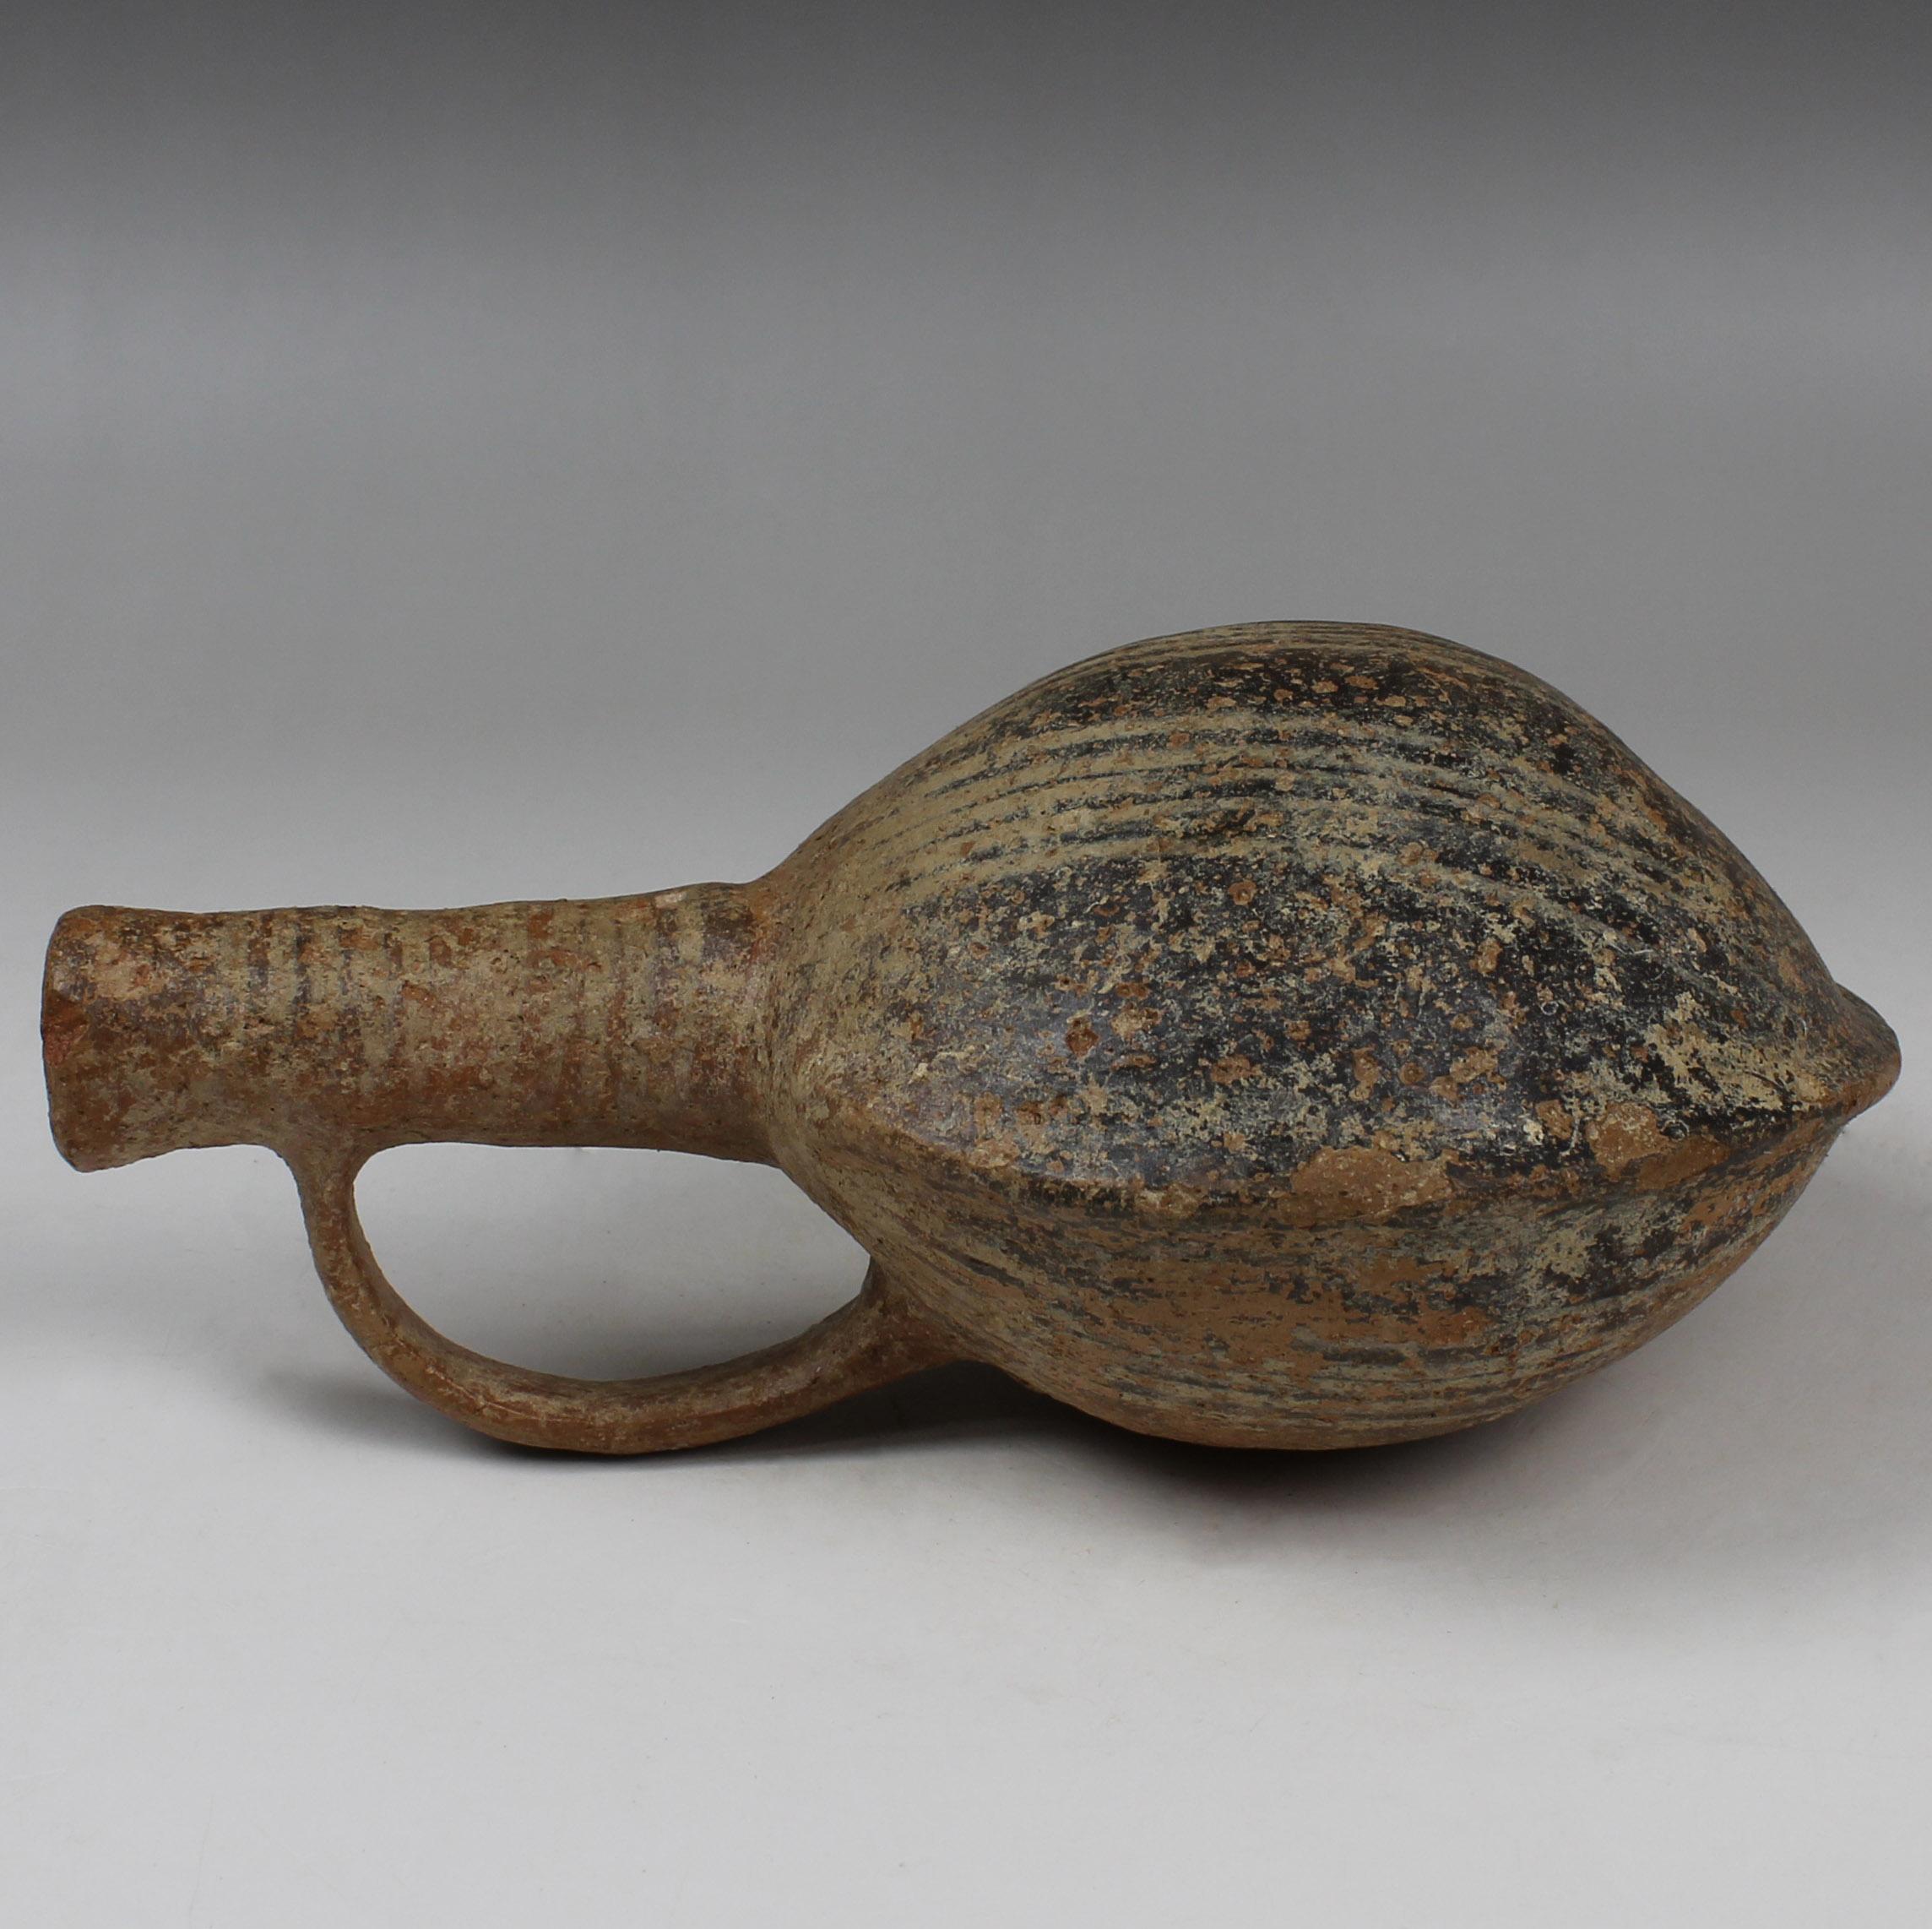 Cypriot Bronze Age flask